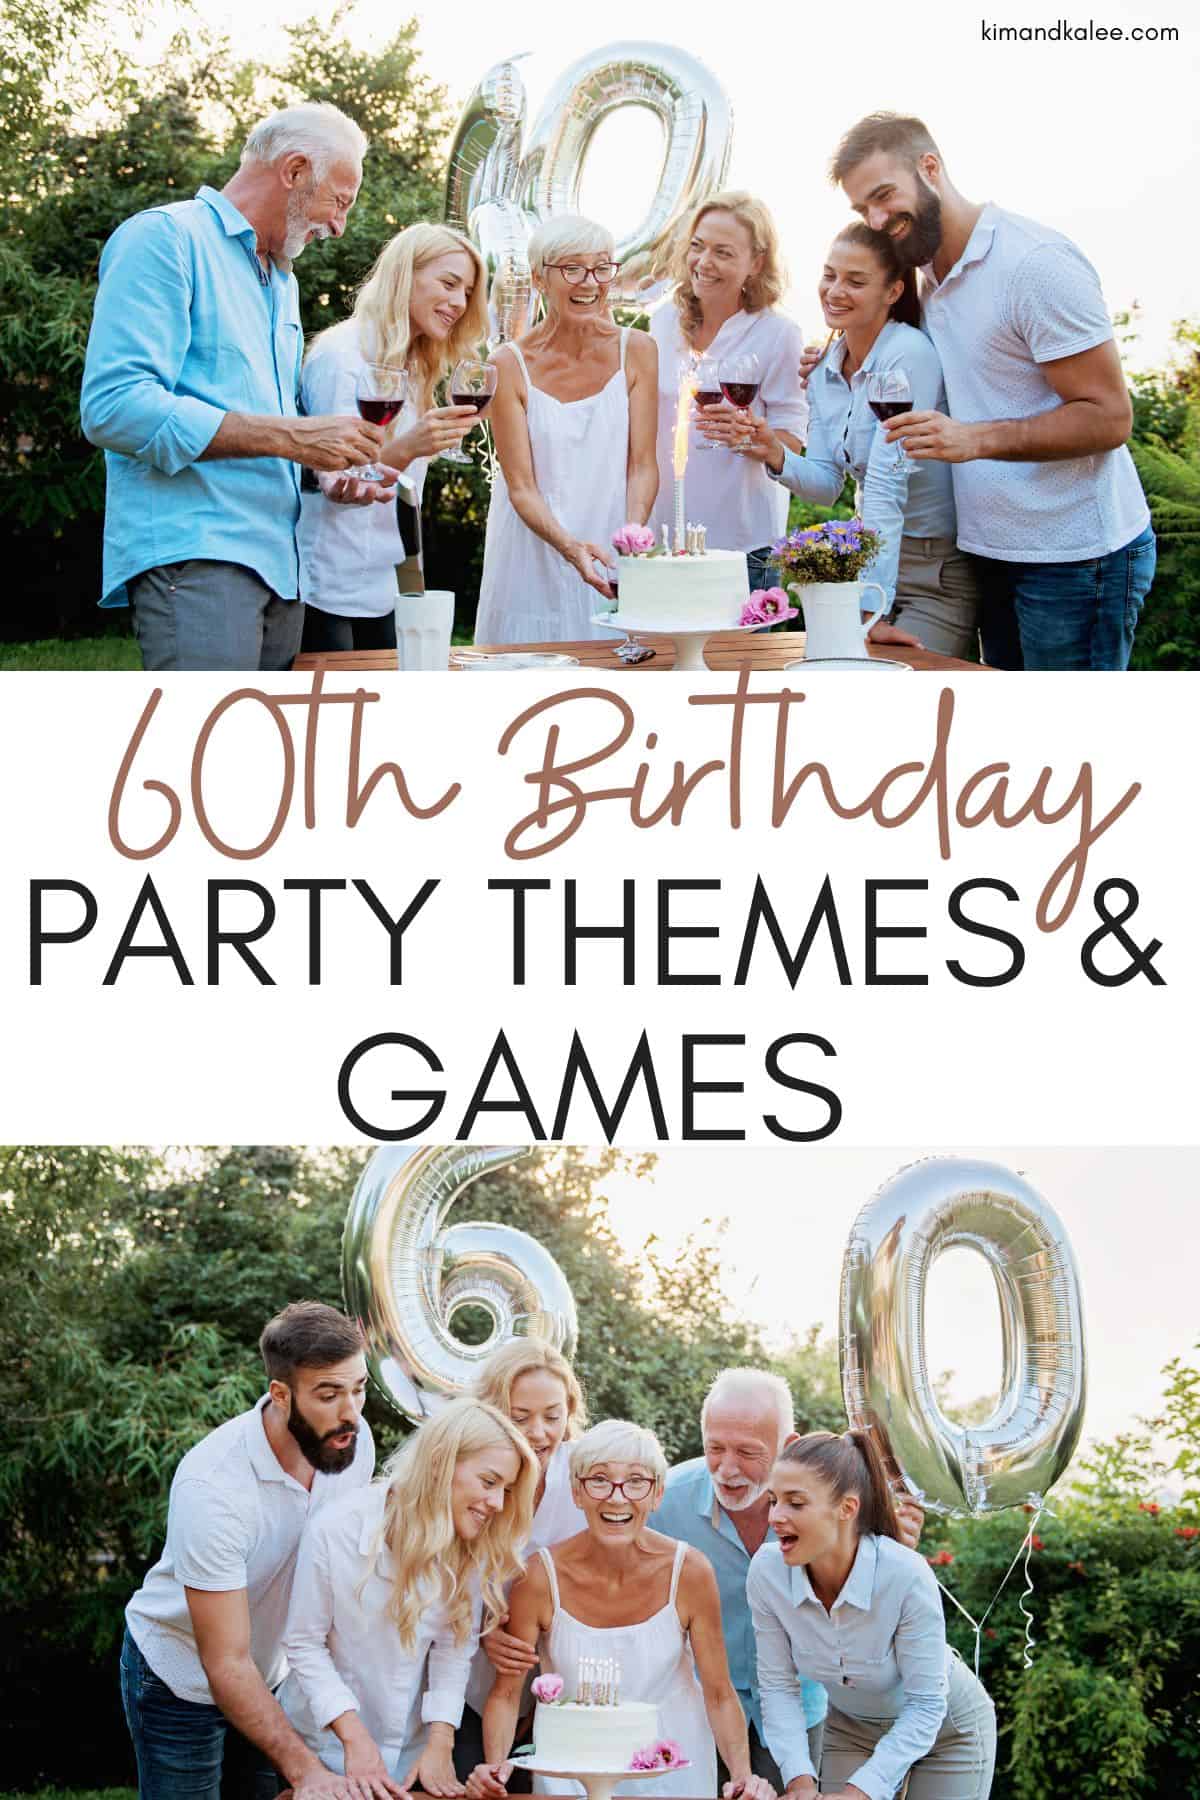 collage of an outdoor 60th birthday party with the birthday girl with her cake - text overlay says 60th Birthday Party Themes and Games for Adults